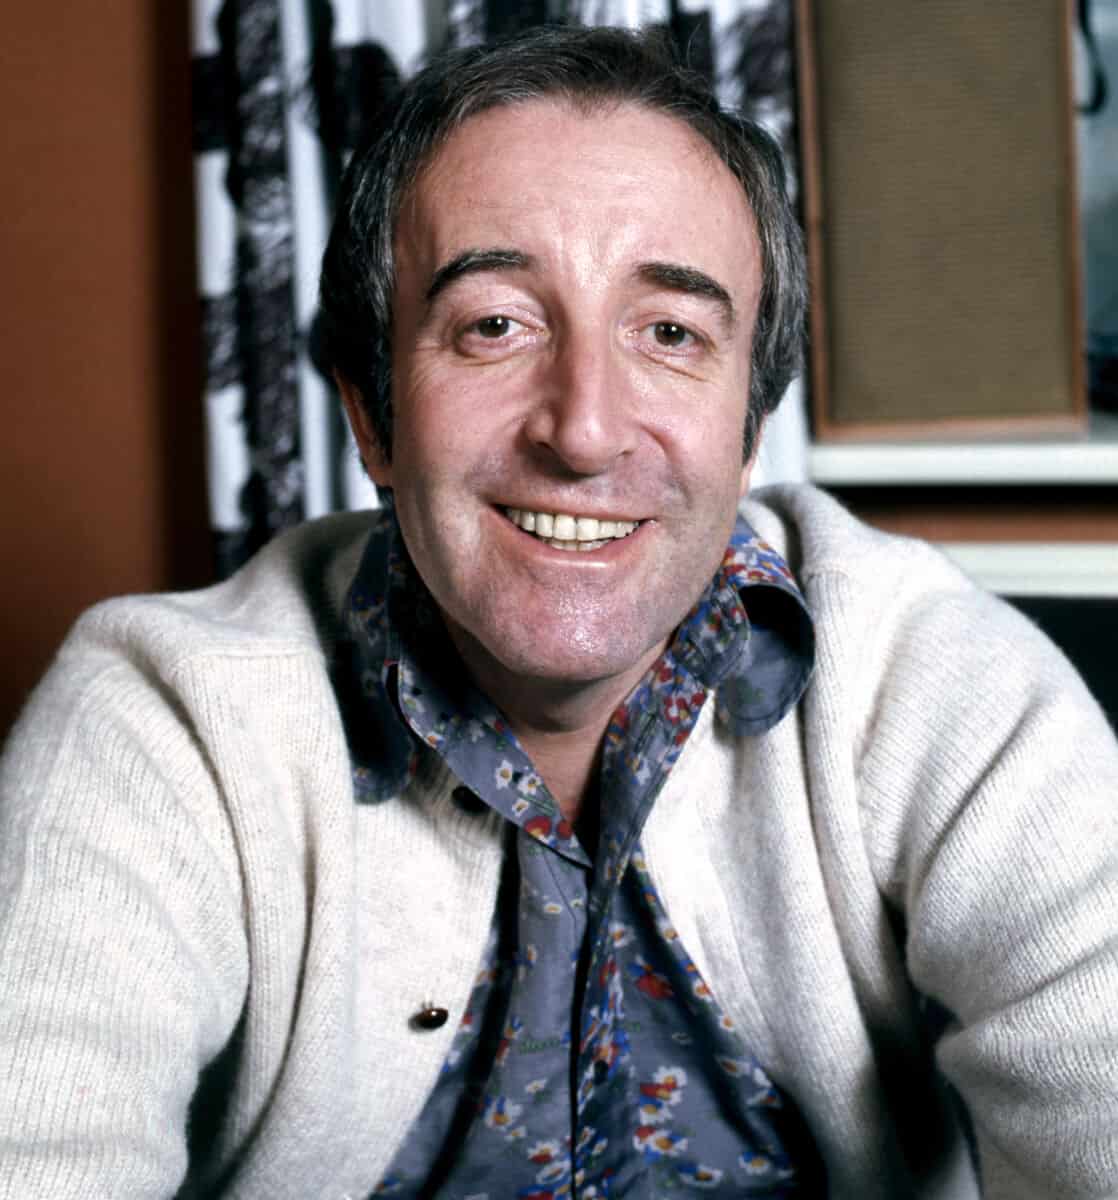 Peter Sellers - Famous Comedian